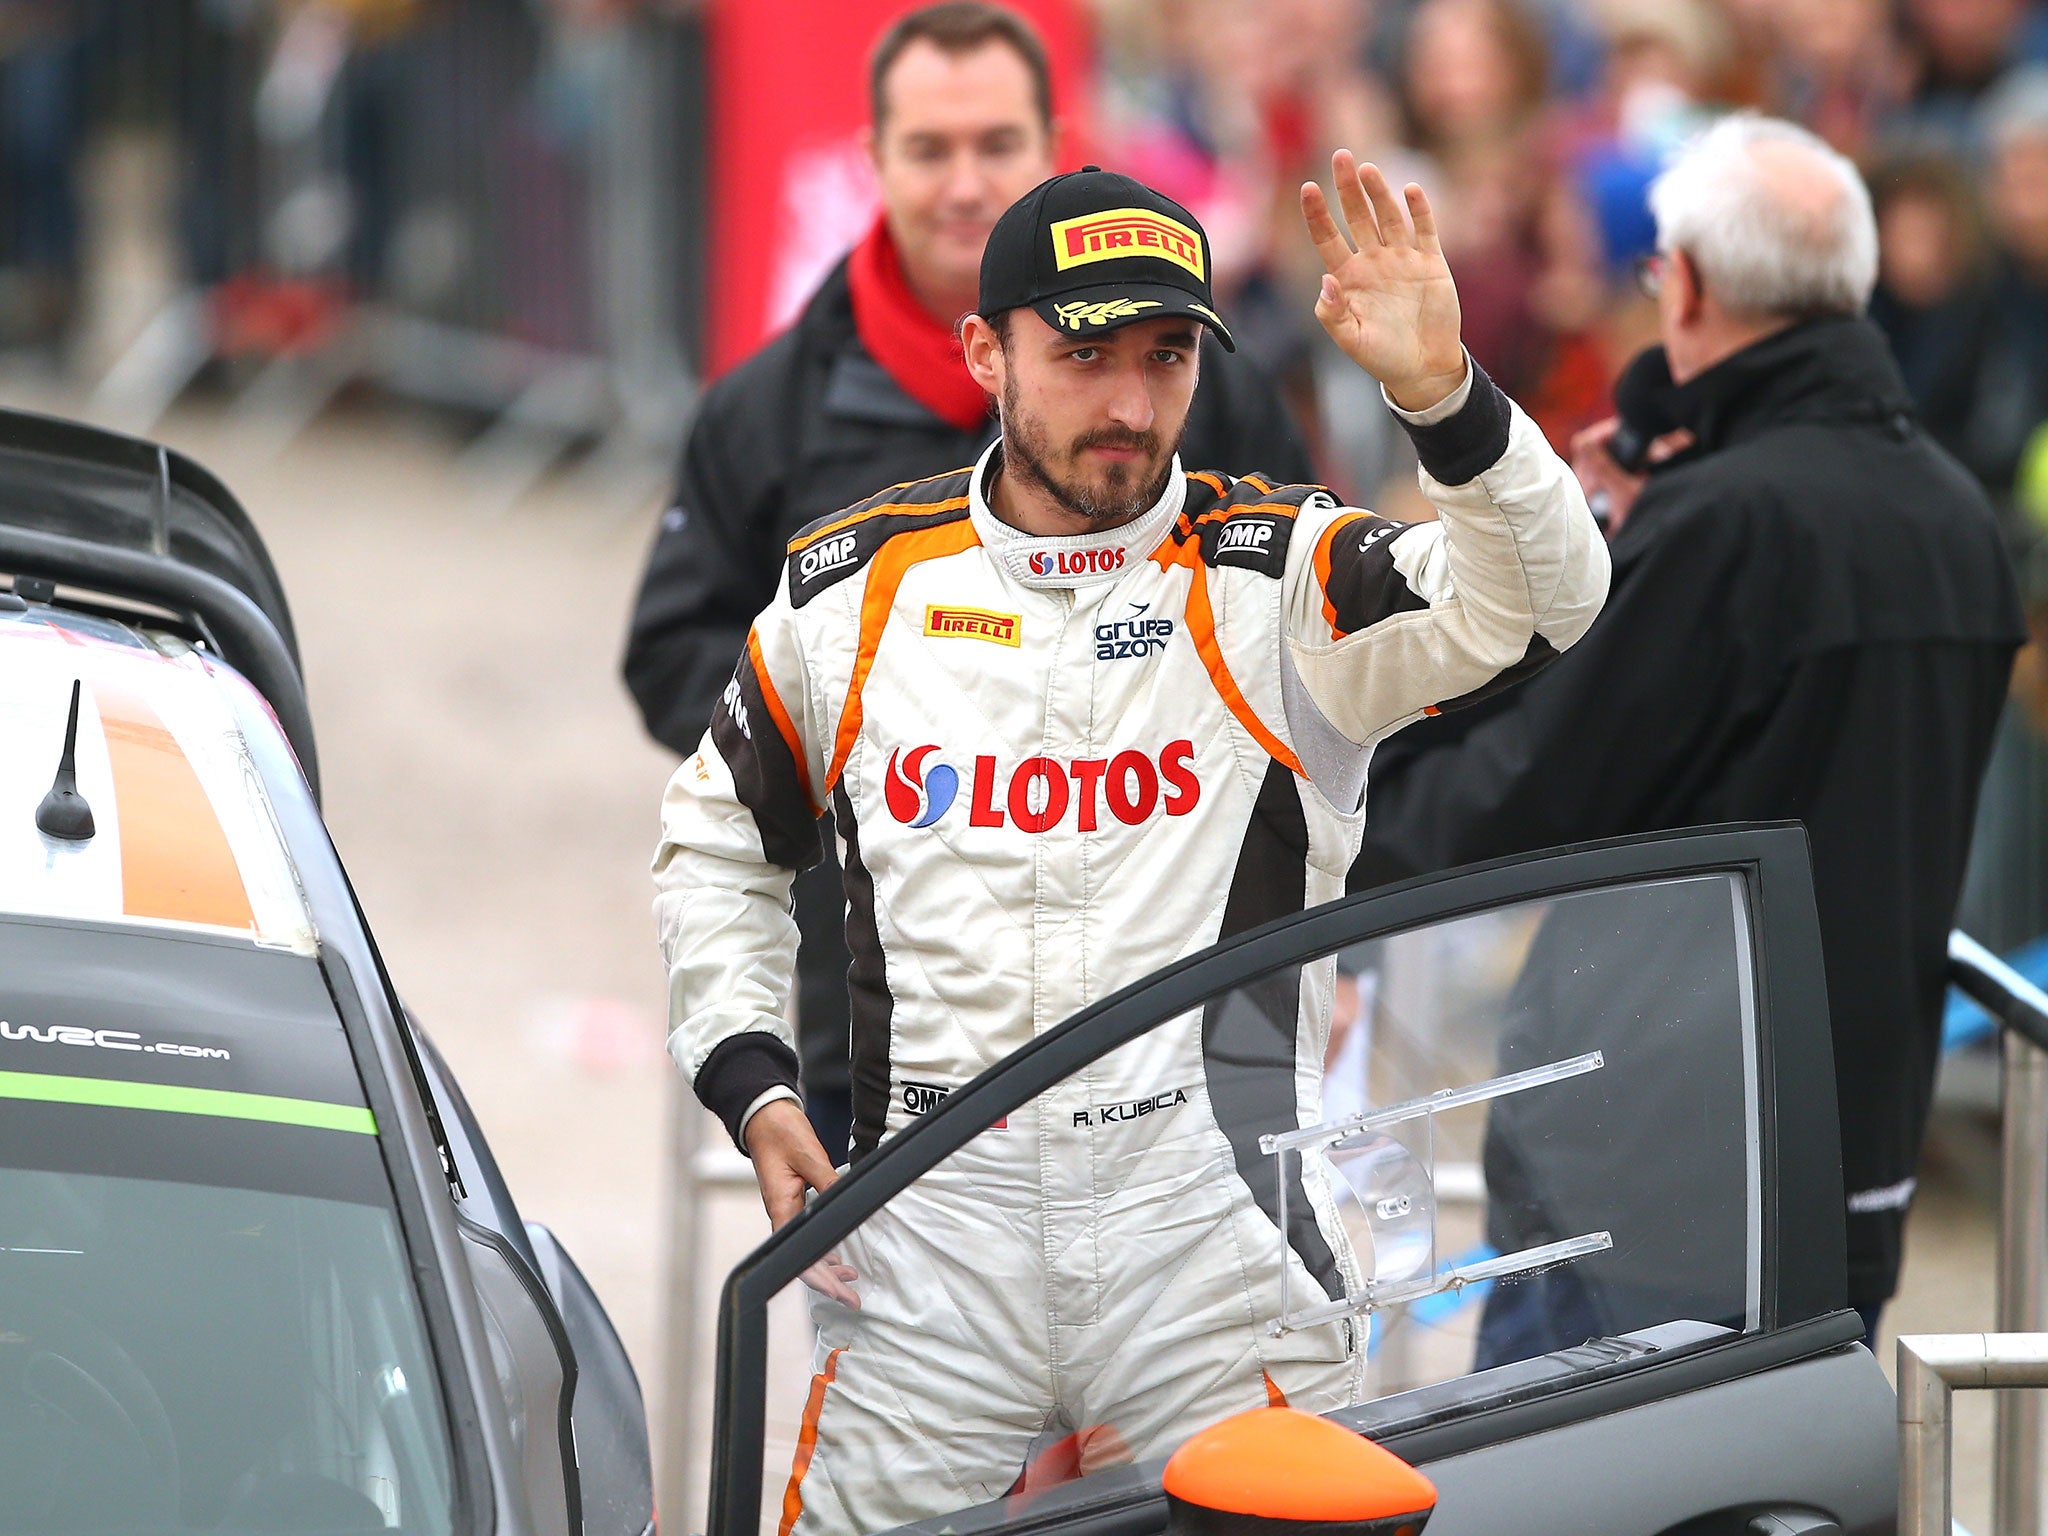 Robert Kubica will get his chance on Wednesday to prove he is a contender for a race seat next year